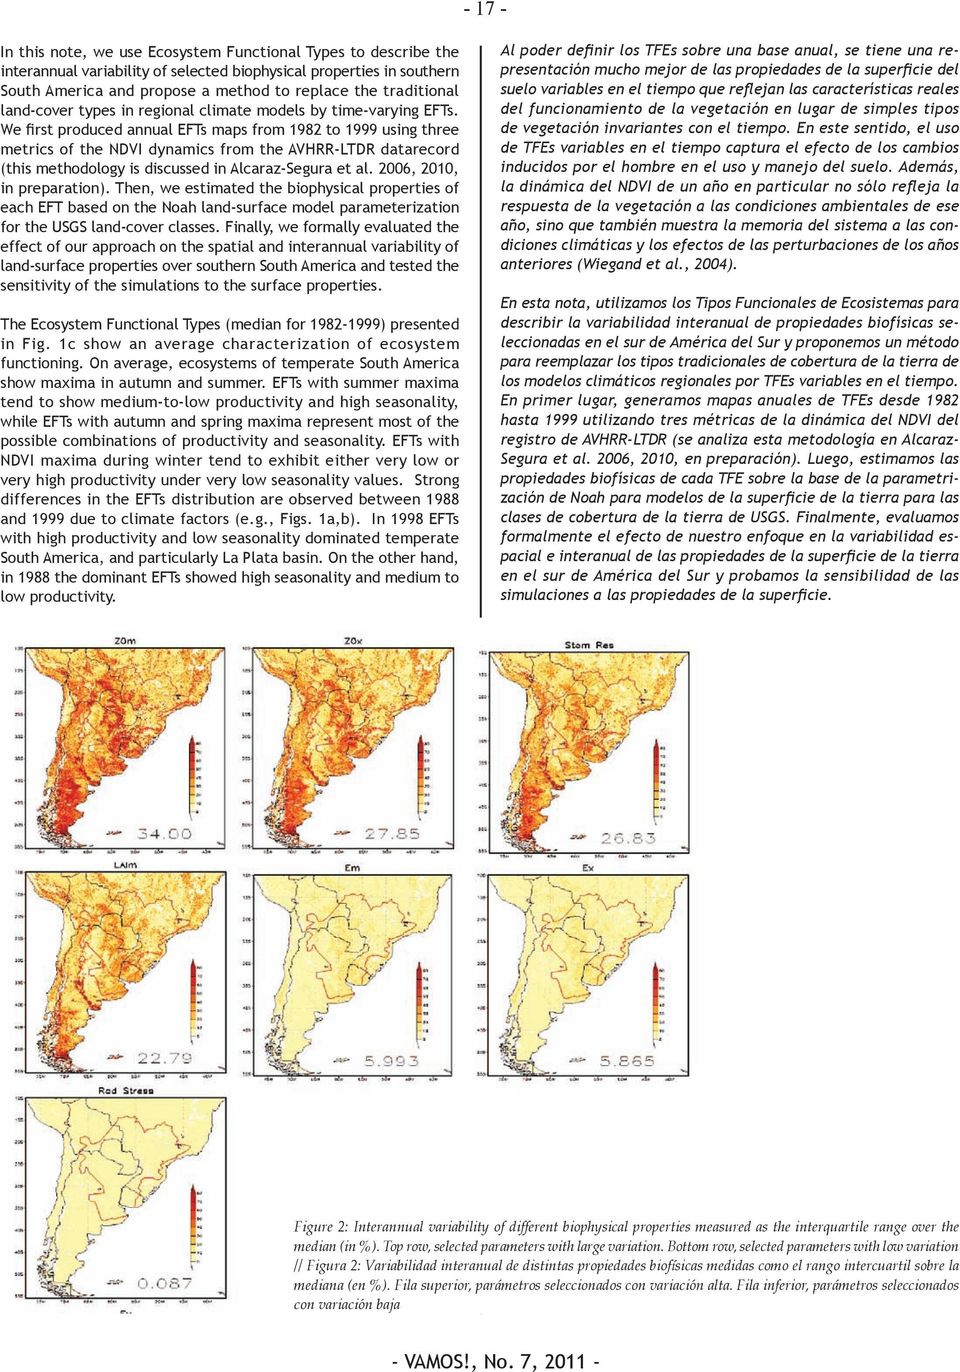 We first produced annual EFTs maps from 1982 to 1999 using three metrics of the NDVI dynamics from the AVHRR-LTDR datarecord (this methodology is discussed in Alcaraz-Segura et al.